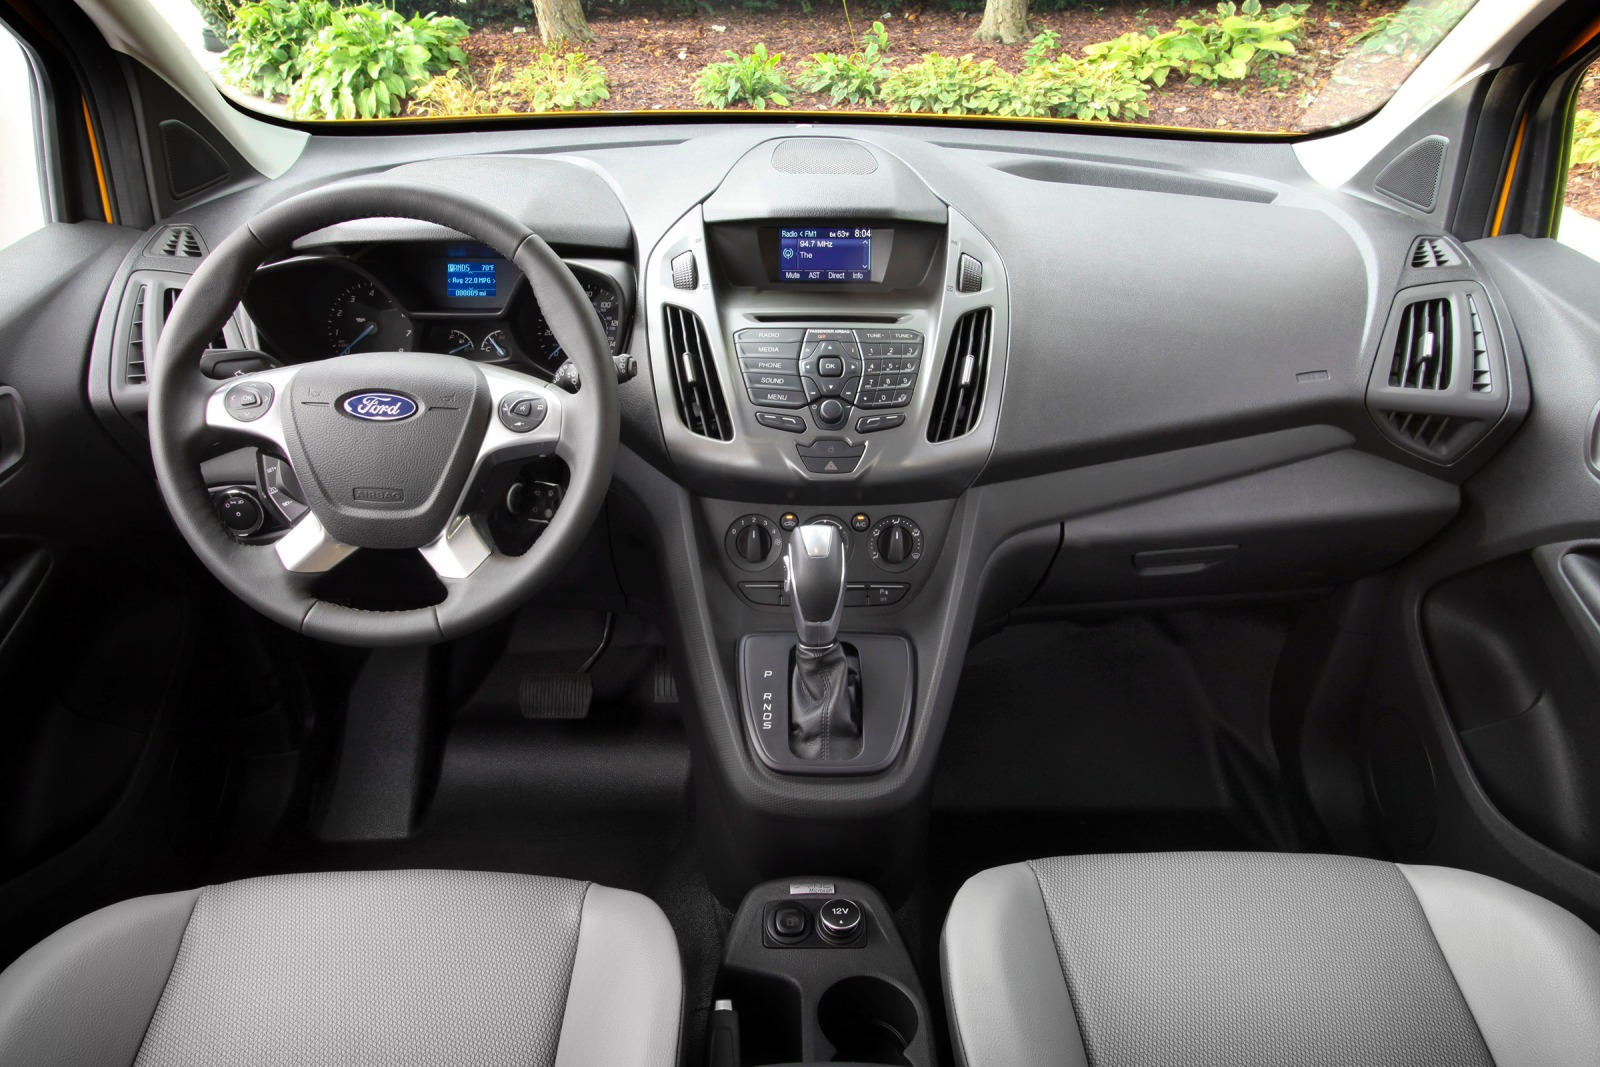 2015 Ford Transit Connect Cargo Van Dashboard